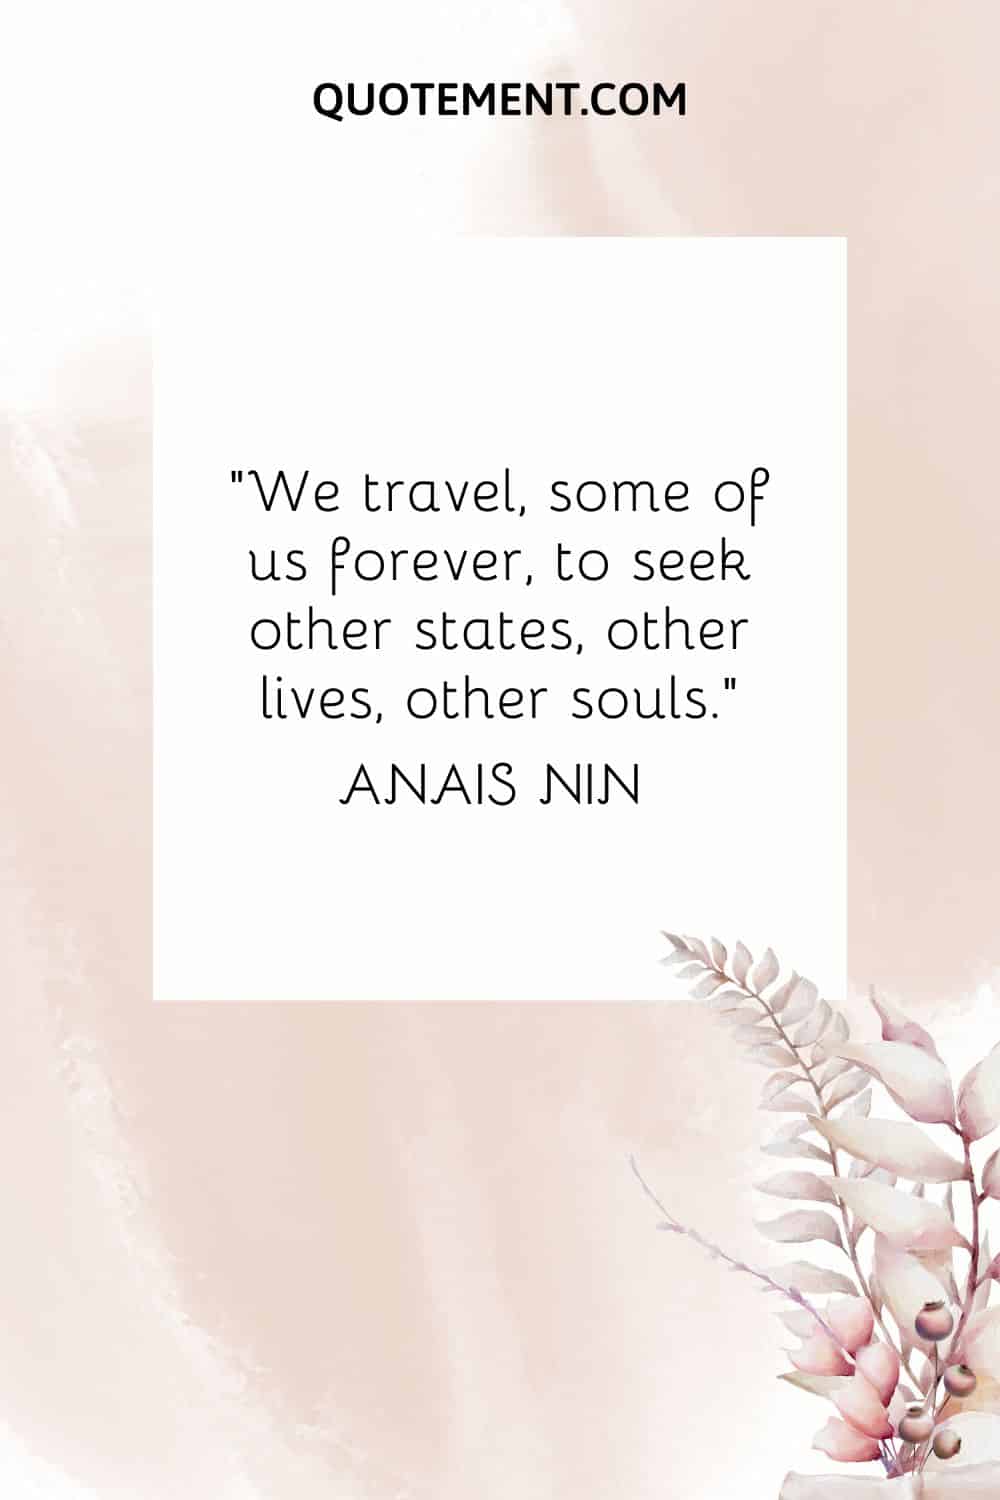 “We travel, some of us forever, to seek other states, other lives, other souls.” — Anais Nin